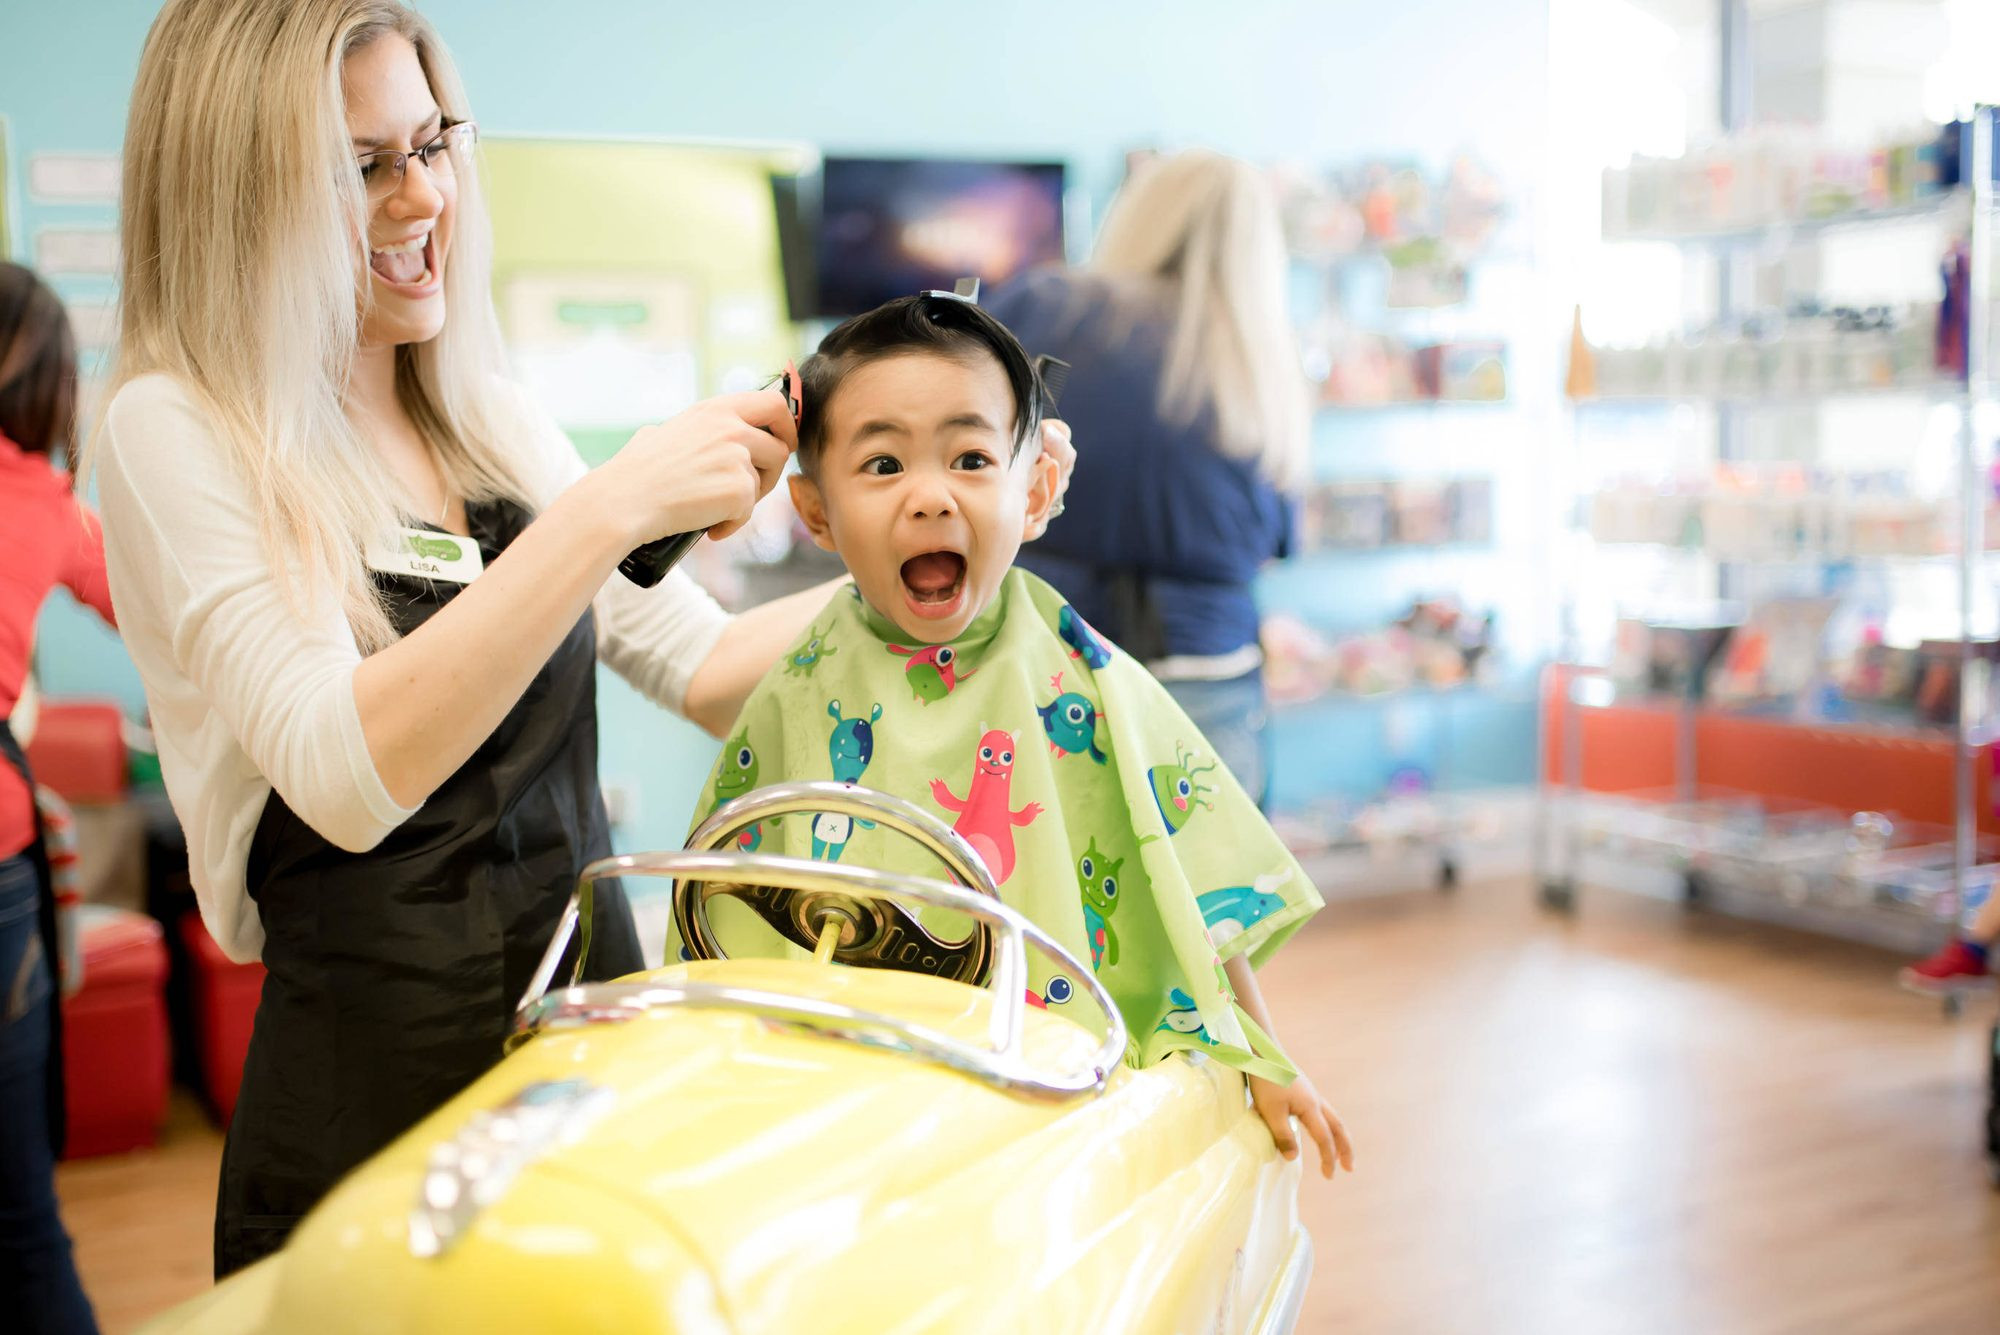 Haircuts Places For Kids
 The Best Places for Kids’ Haircuts in Danville